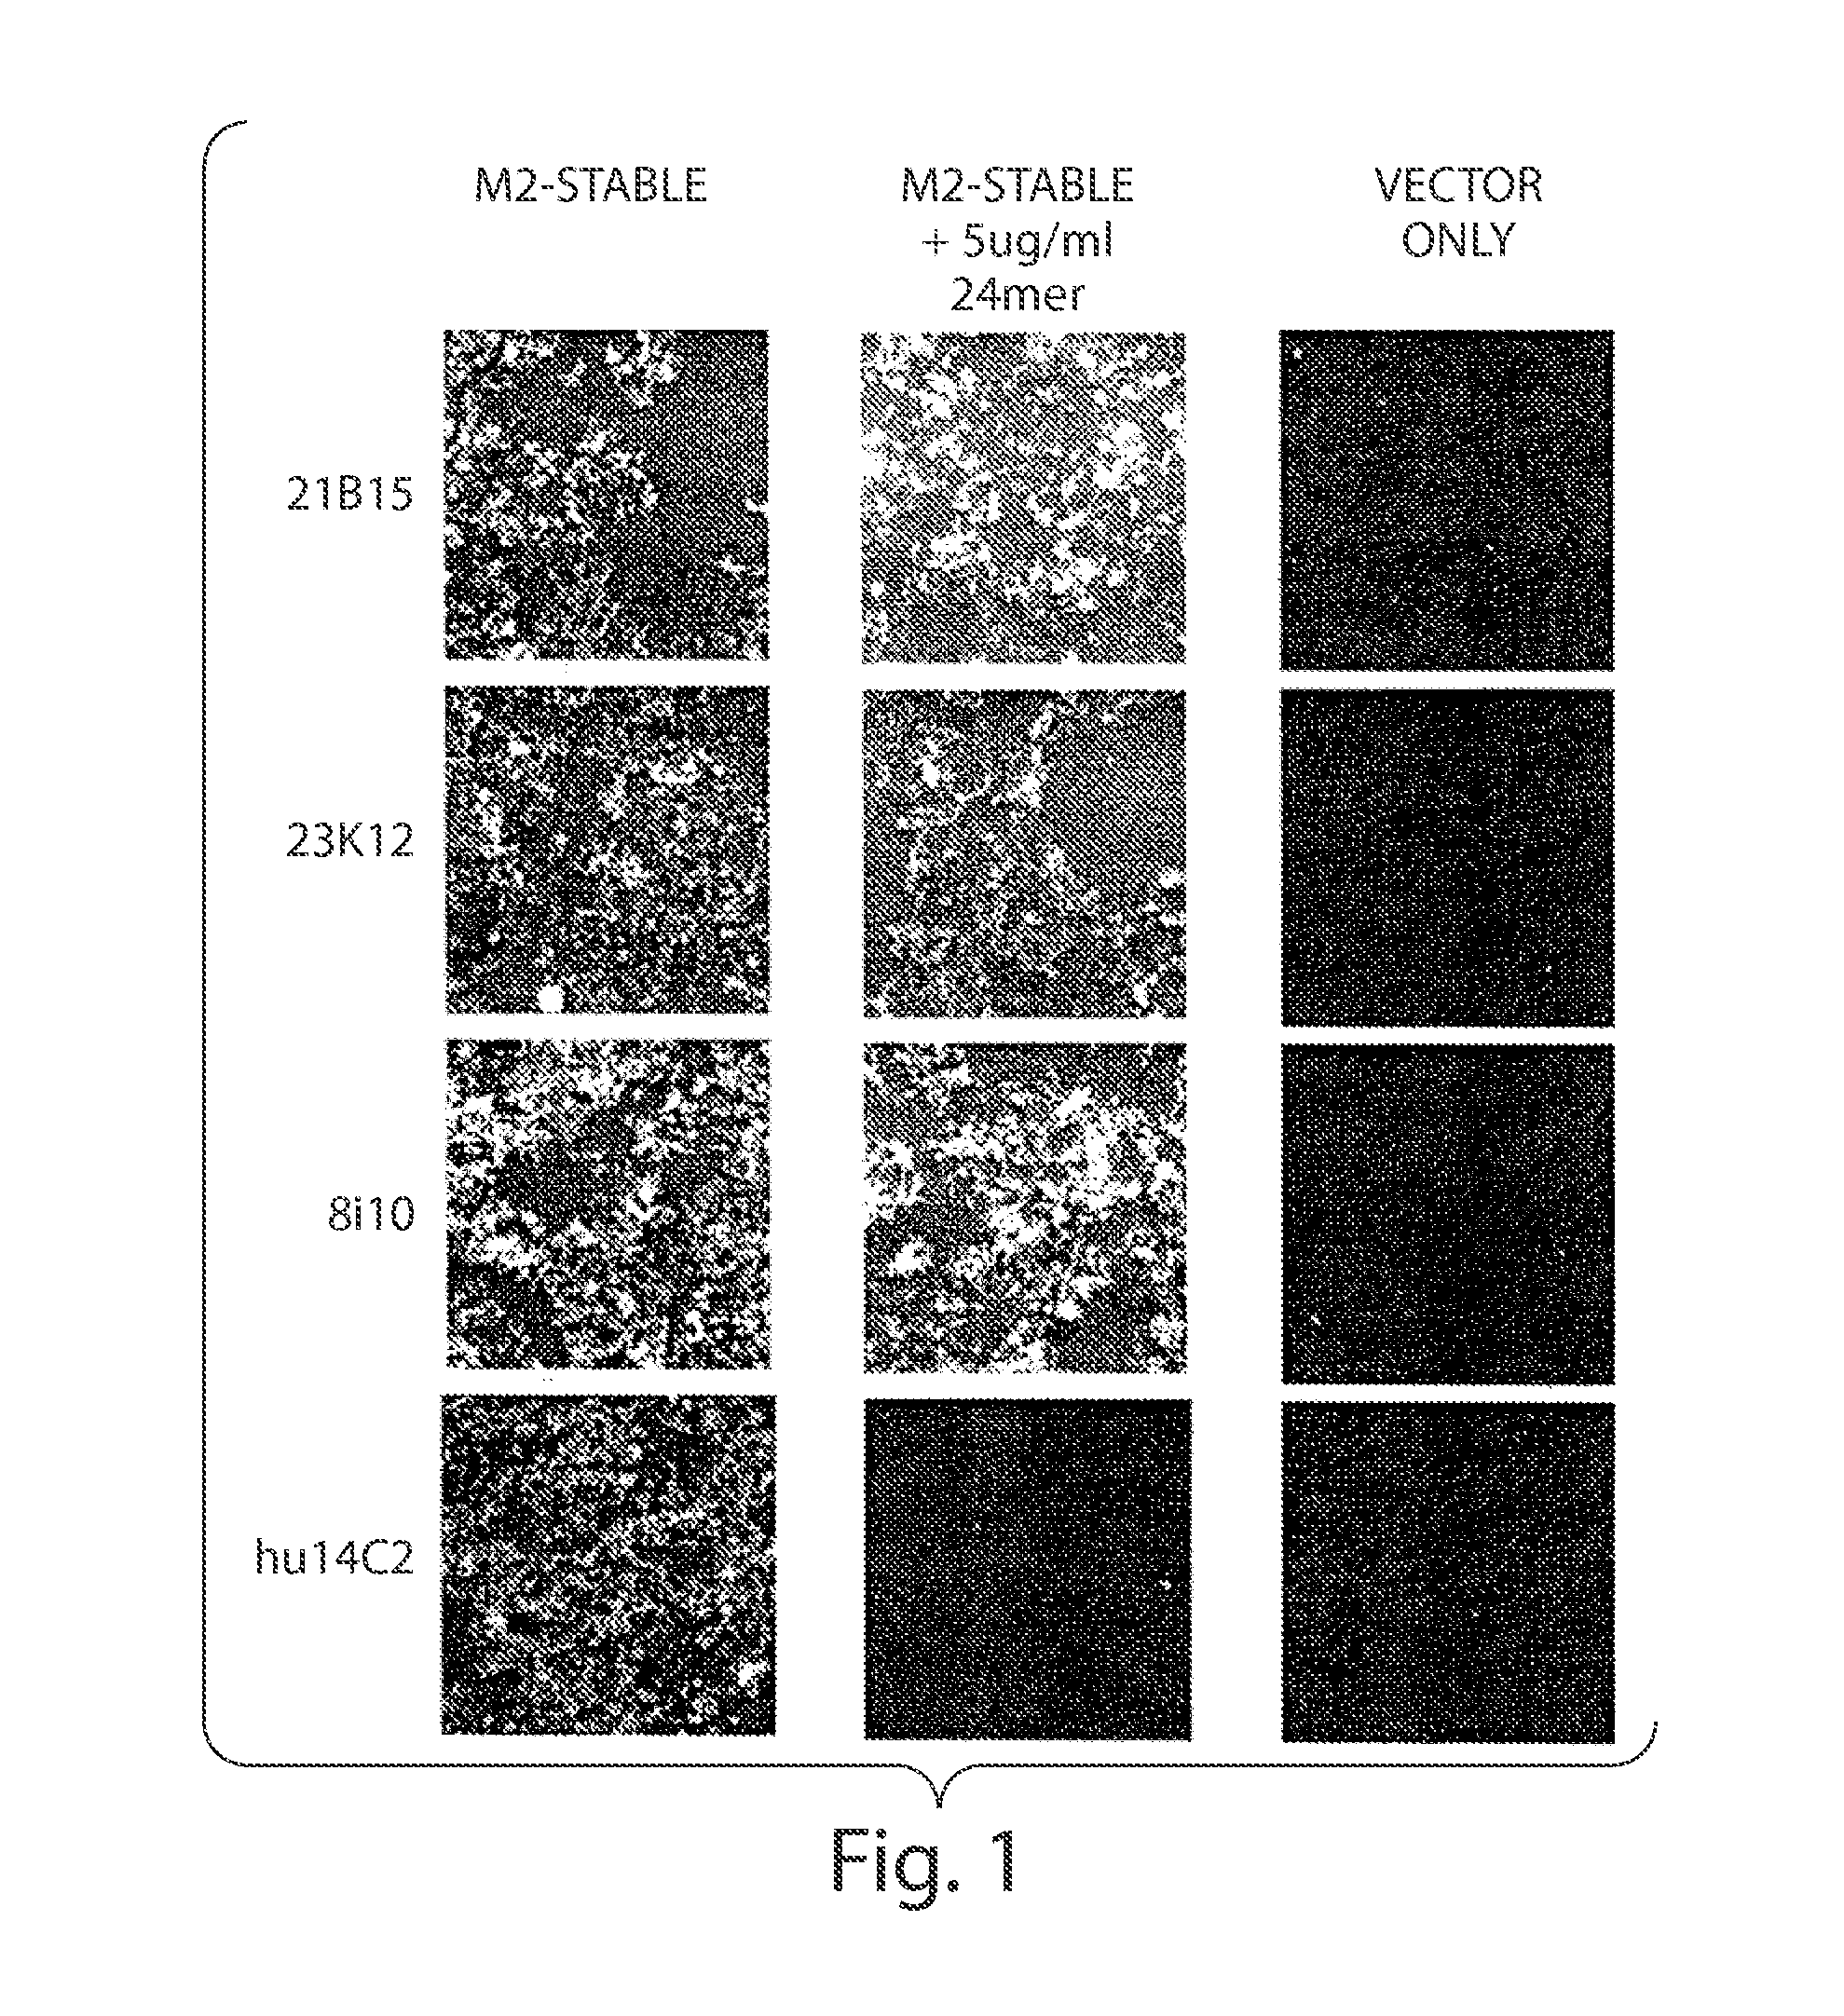 Compositions And Methods For The Therapy And Diagnosis Of Influenza